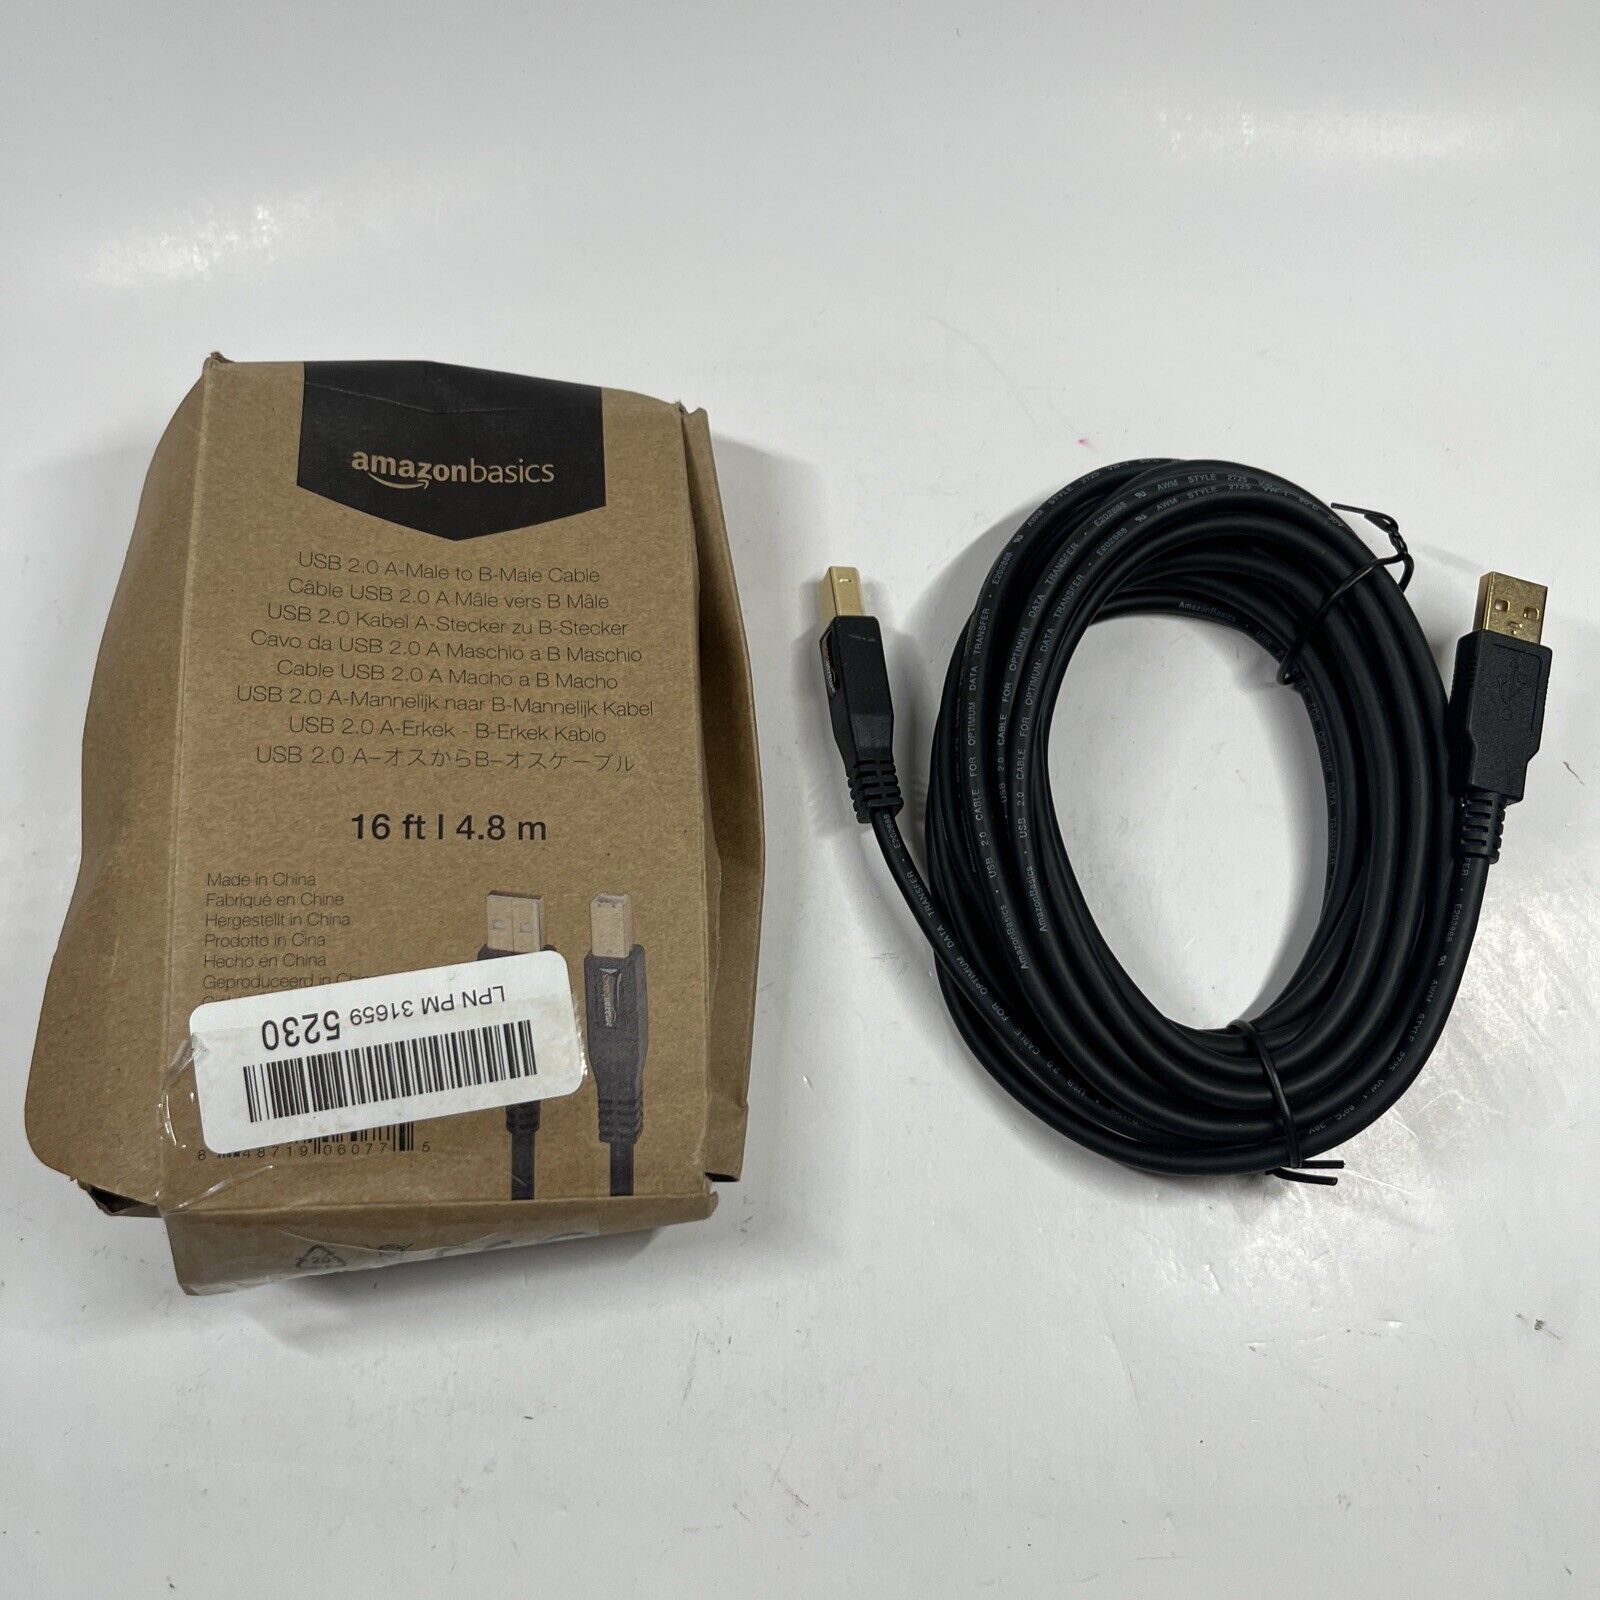 AmazonBasics PC045 16ft USB 2.0 Male to Male Cable NEW